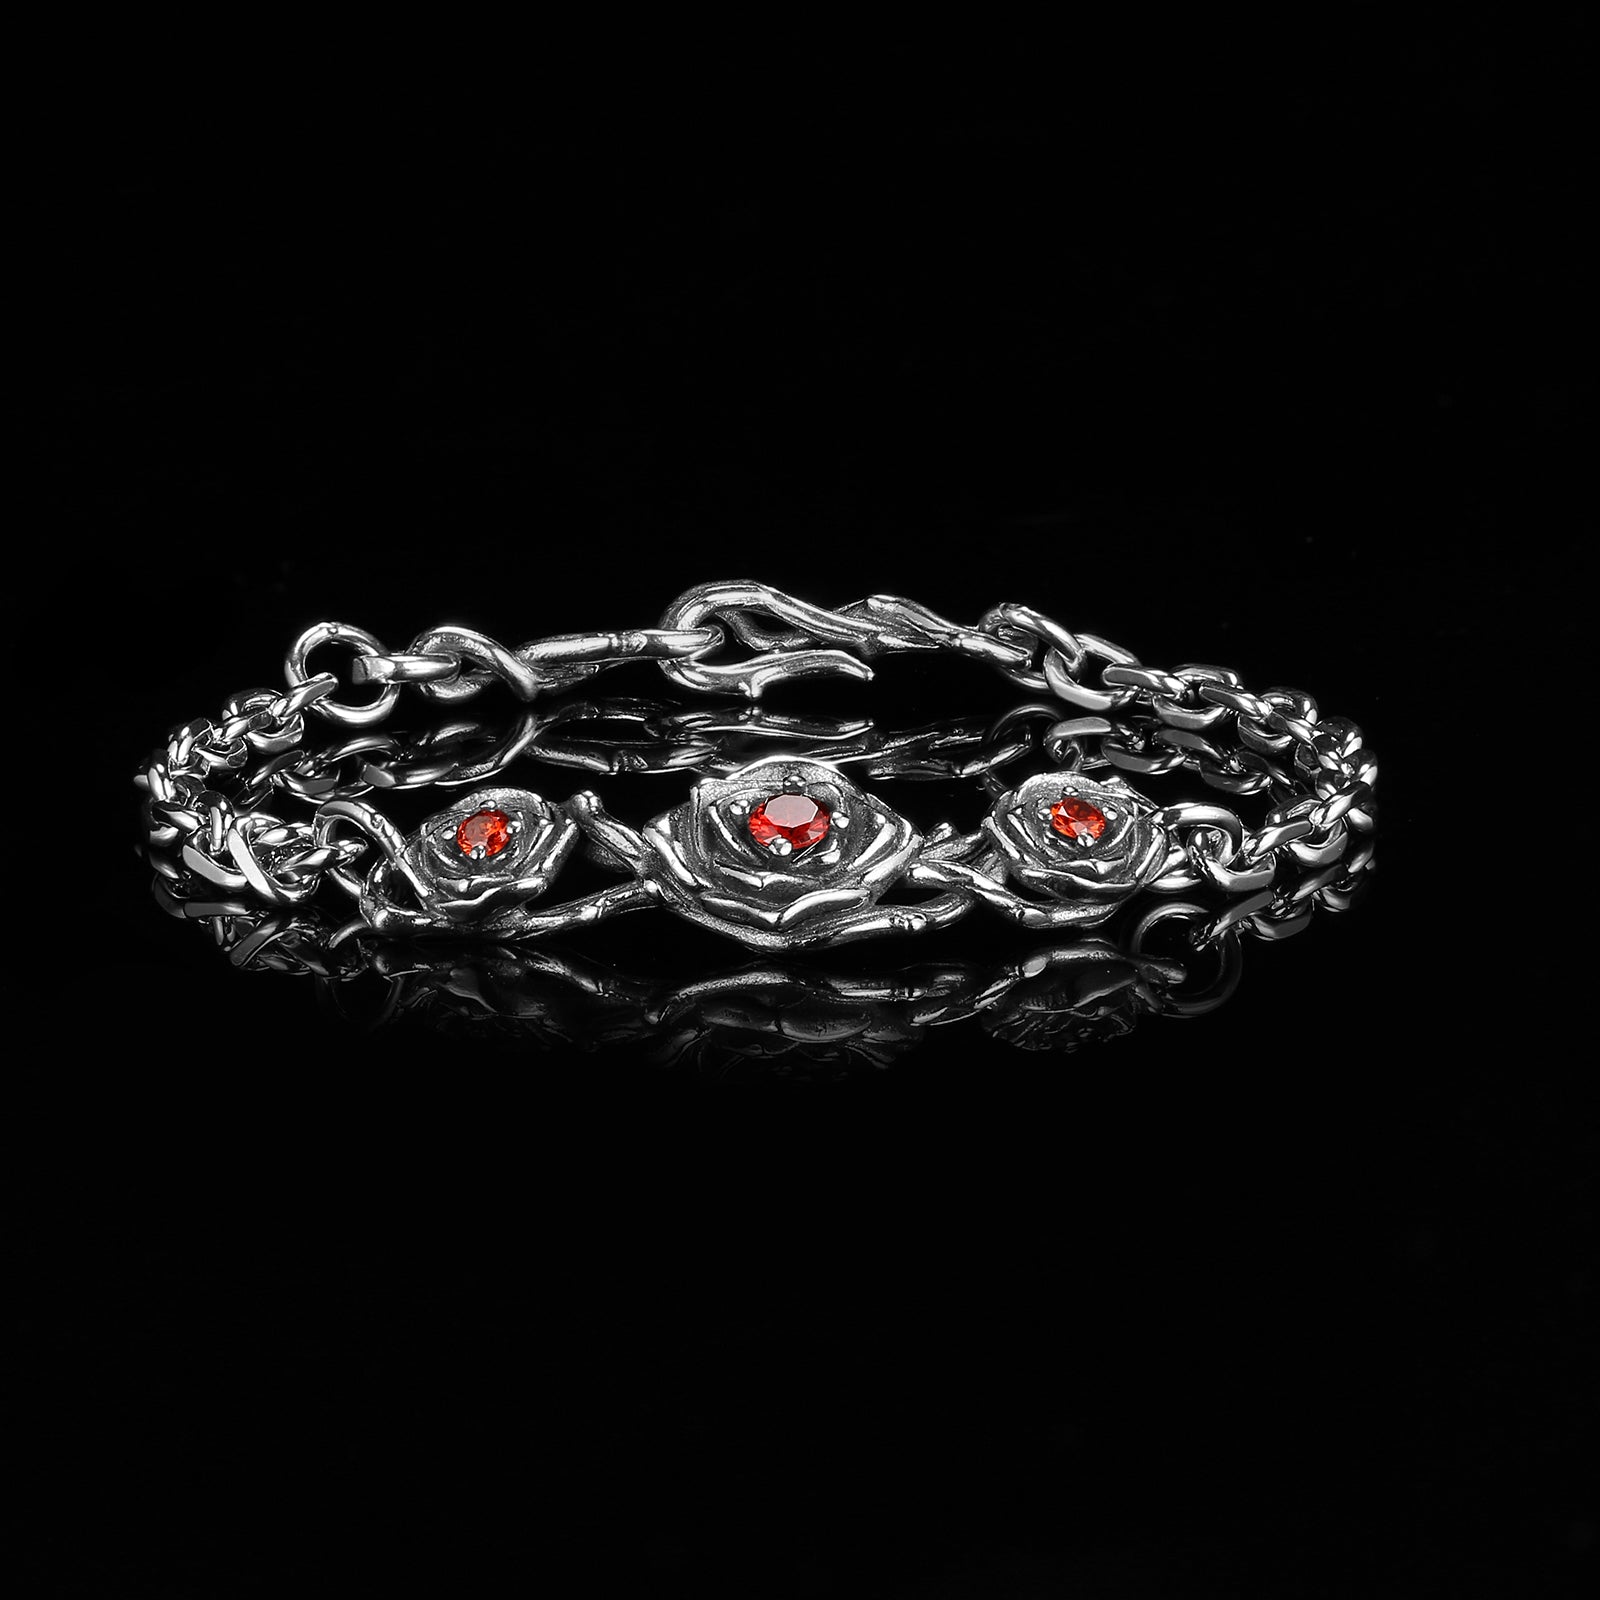 RED ROSES BRACCIALETTO. - ARGENTO STERLING 925